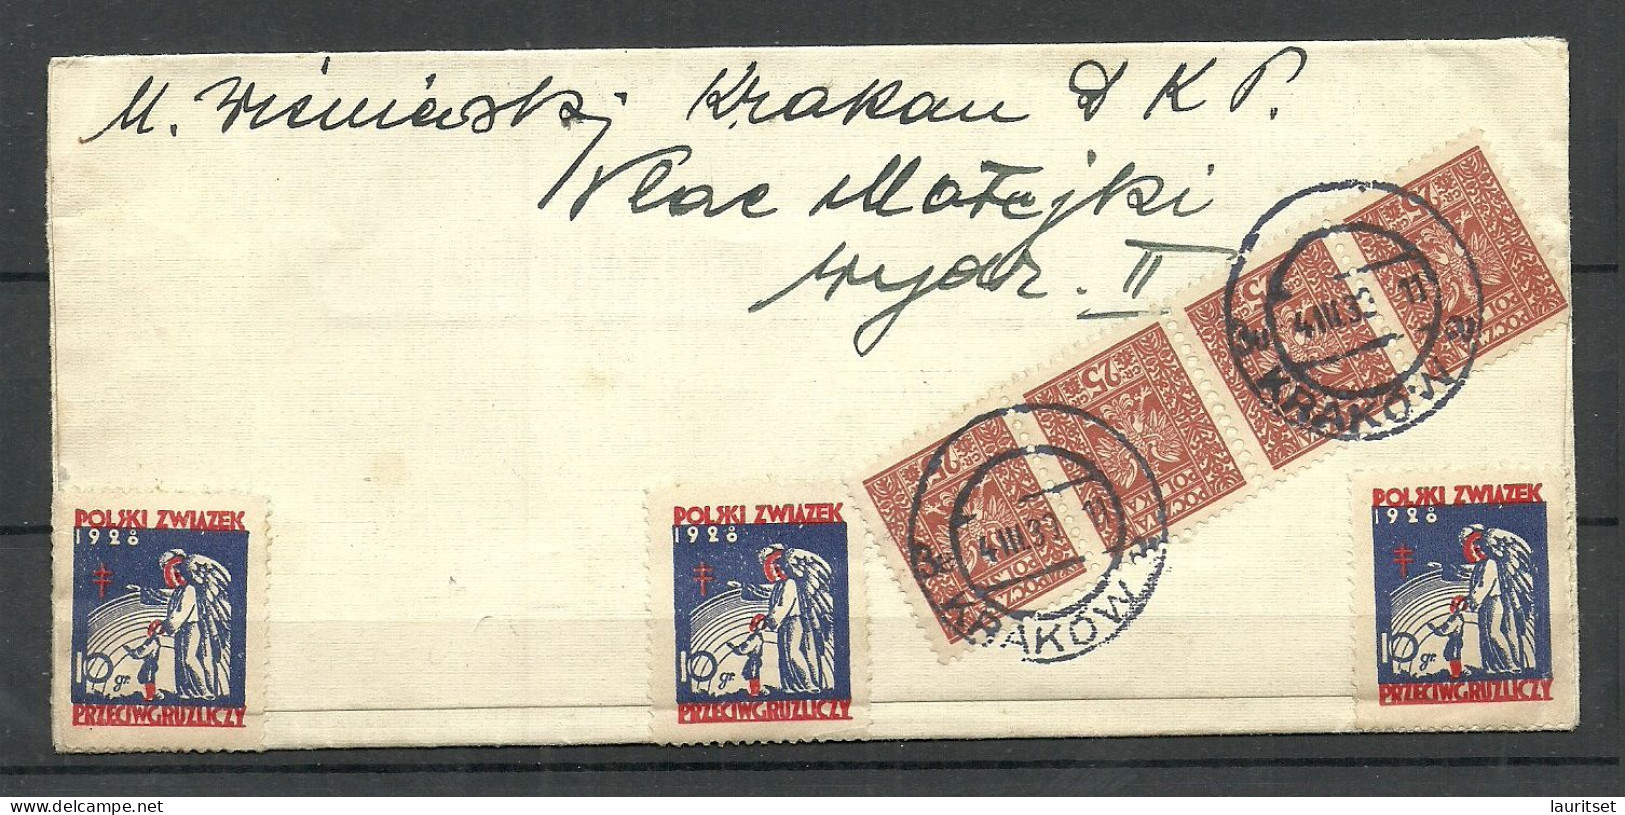 POLEN Poland 1930 O KRAKOW Registered Cover To Austria Wien With 3 Charity Tuberculosis Poster Stamps - Covers & Documents